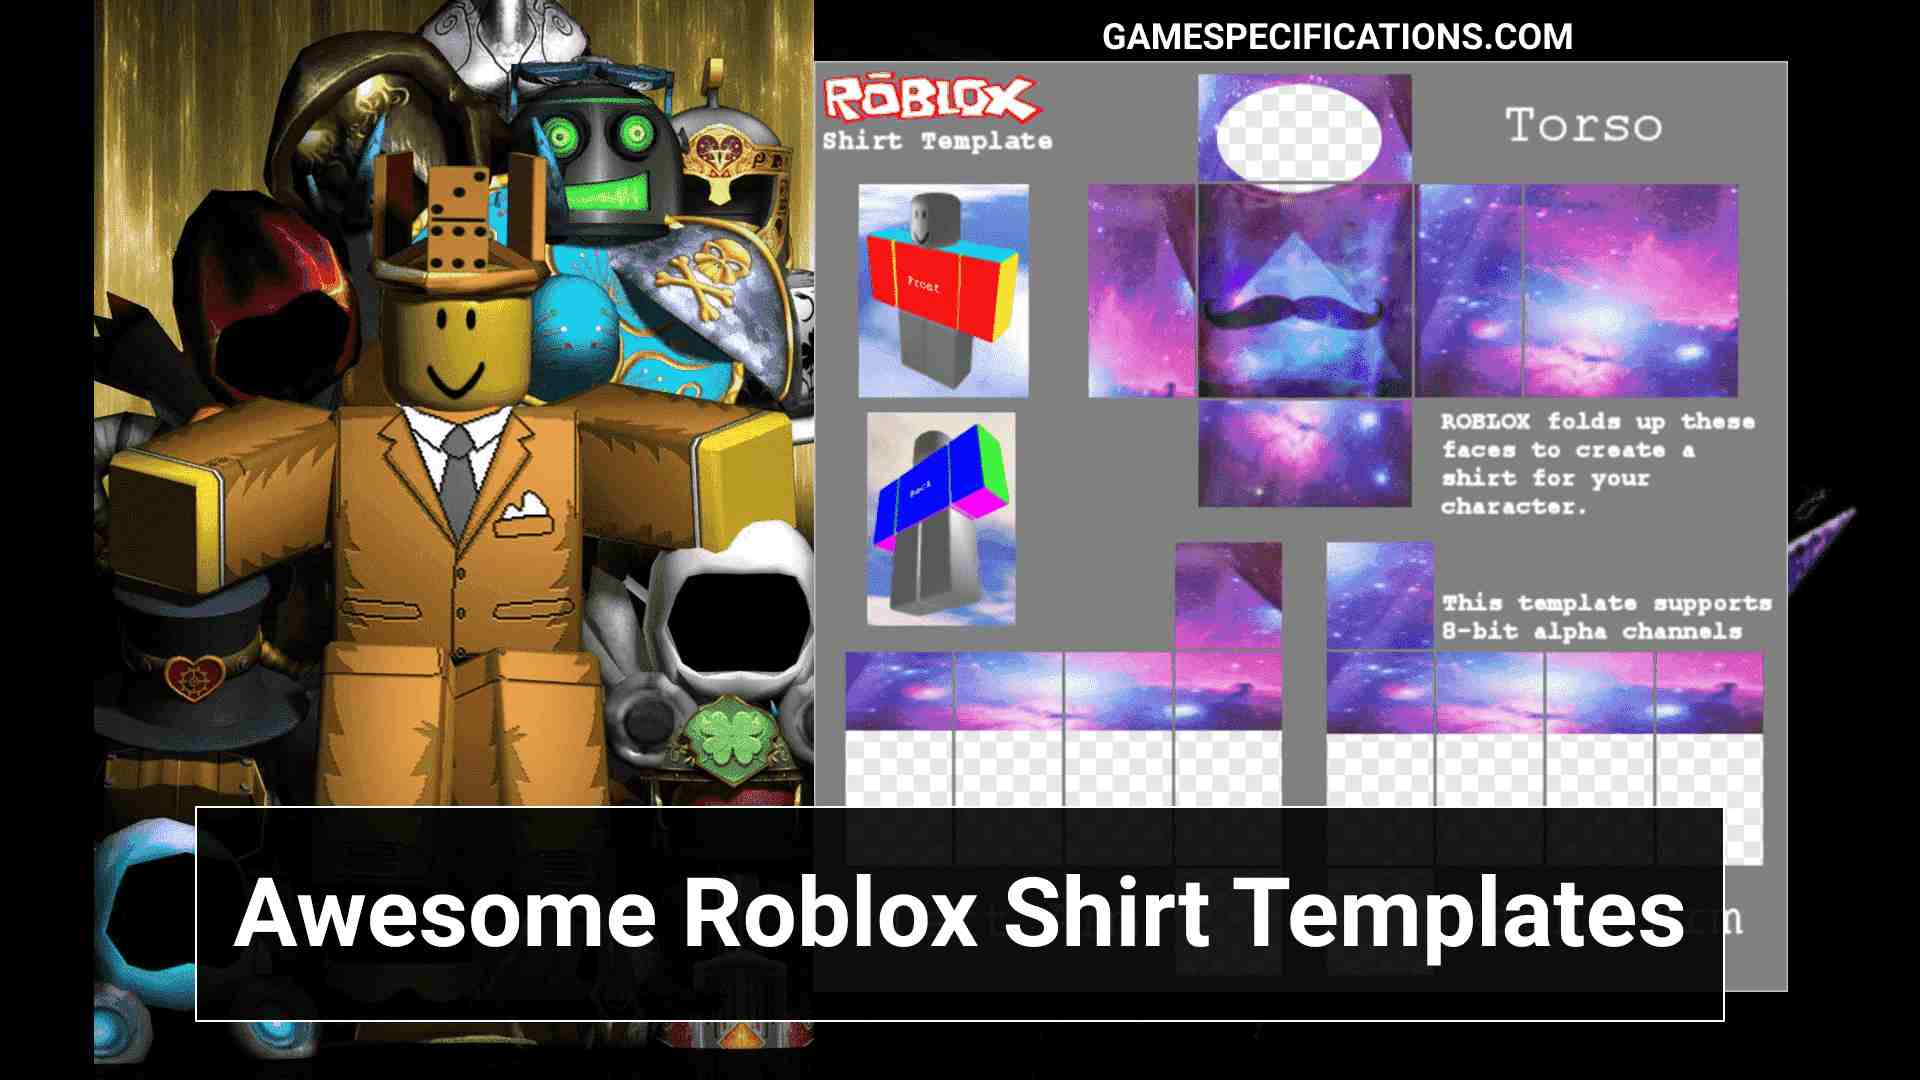 25 Coolest Roblox Shirt Templates Proved To Be The Best Game Specifications - rainbow tee roblox